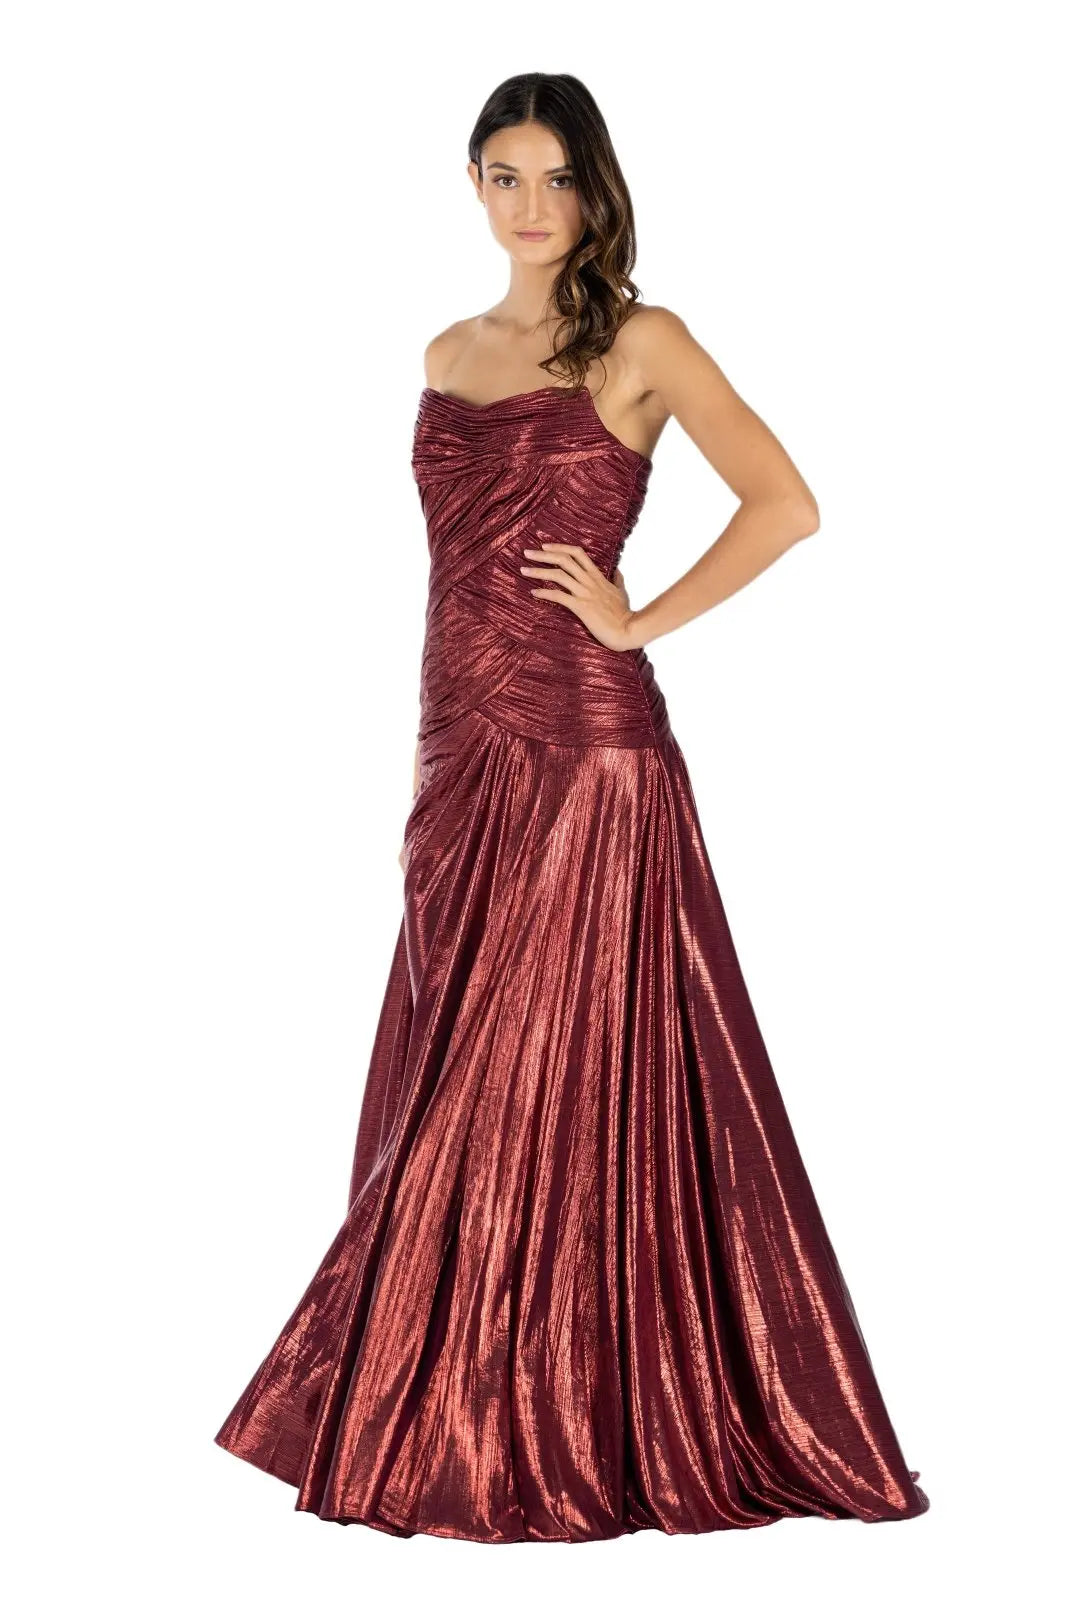 Strapless Hand Draped Metallic Stretch Gown  